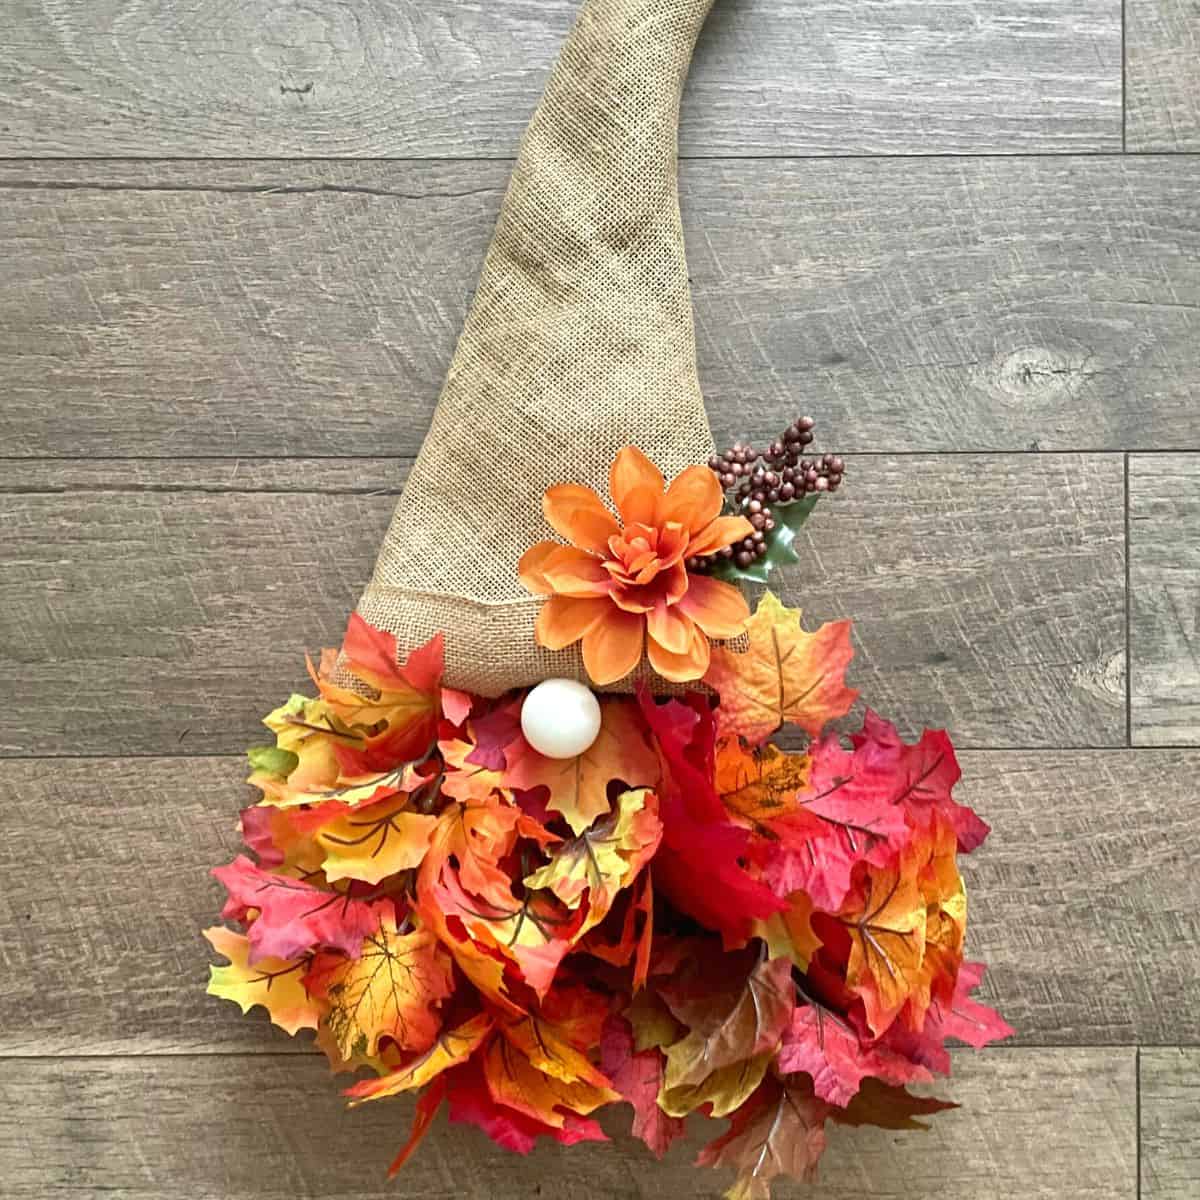 Easy Fall Gnome Door Hanger DIY, a simple and adorable 20 minute craft project for most ages that can be made with dollar store materials. 